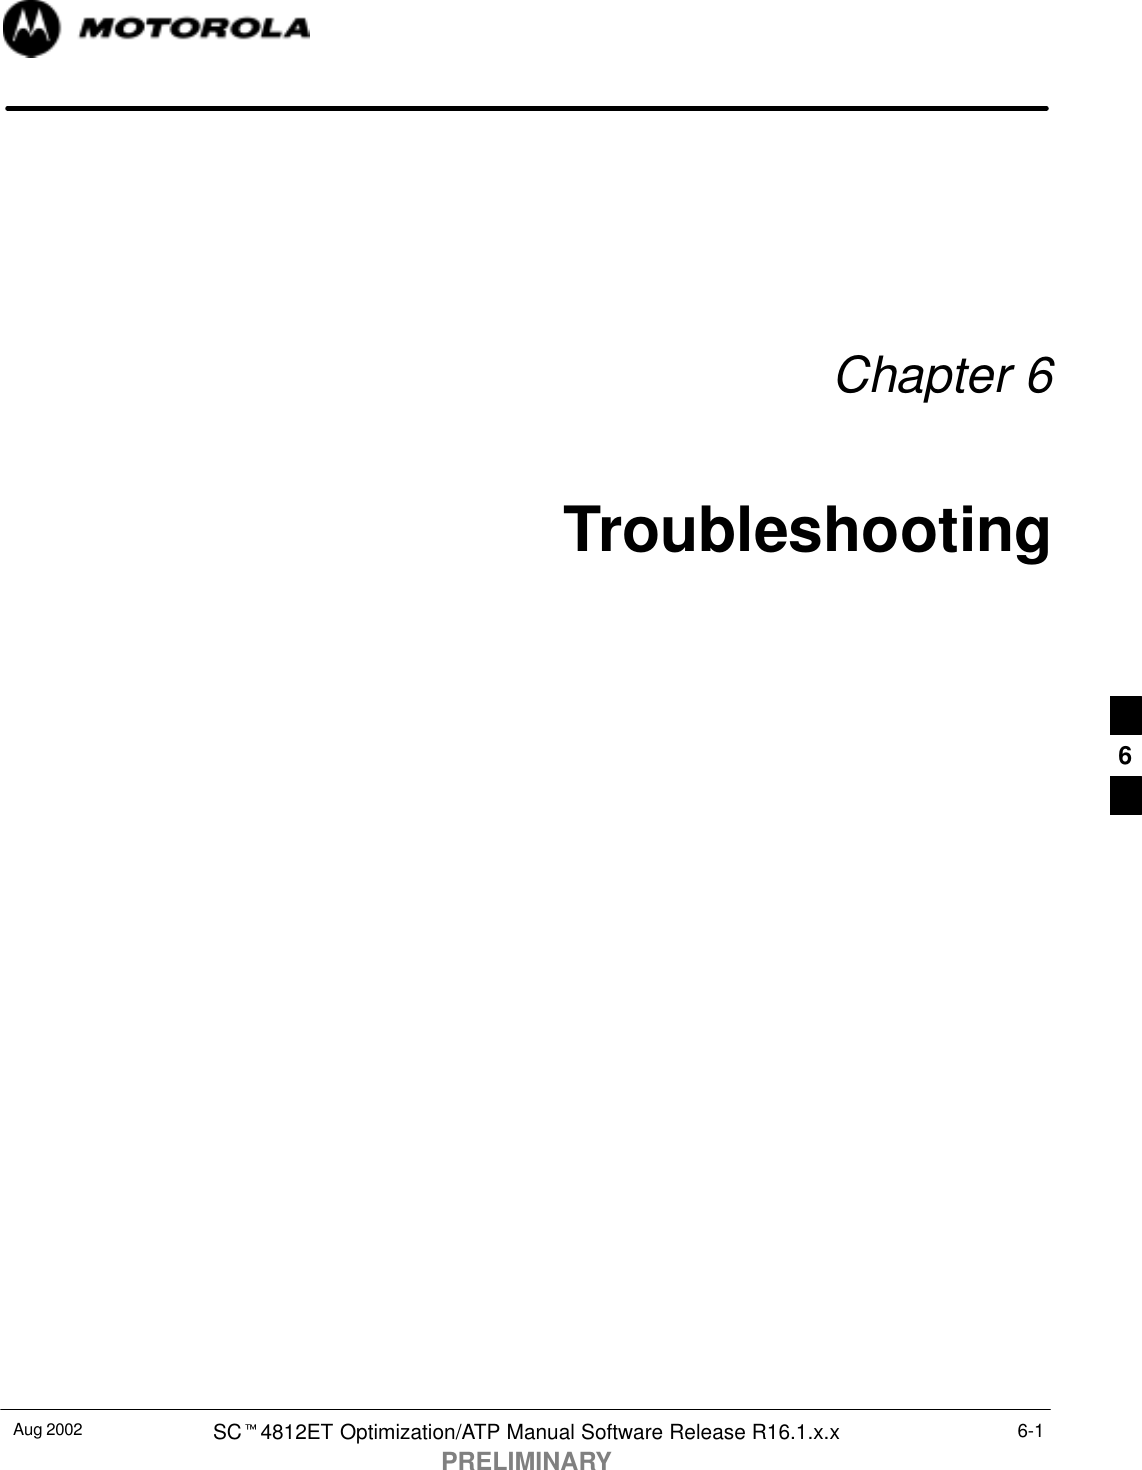 Aug 2002 SCt4812ET Optimization/ATP Manual Software Release R16.1.x.xPRELIMINARY6-1Chapter 6Troubleshooting6